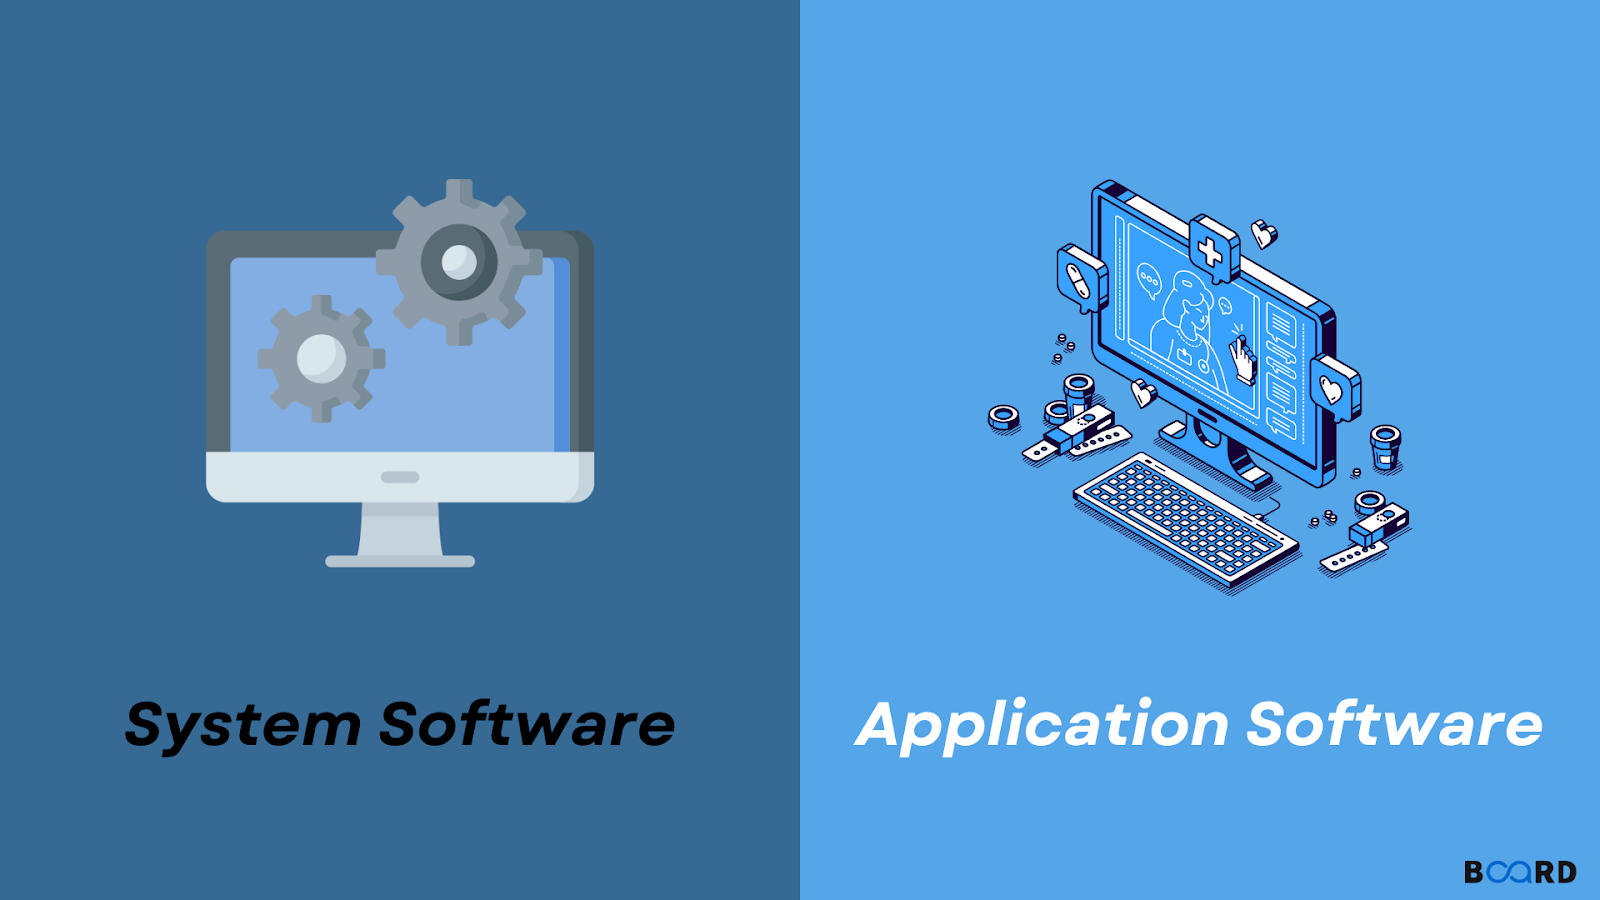 Discover the difference of software types - Image Source: Board Infinity
